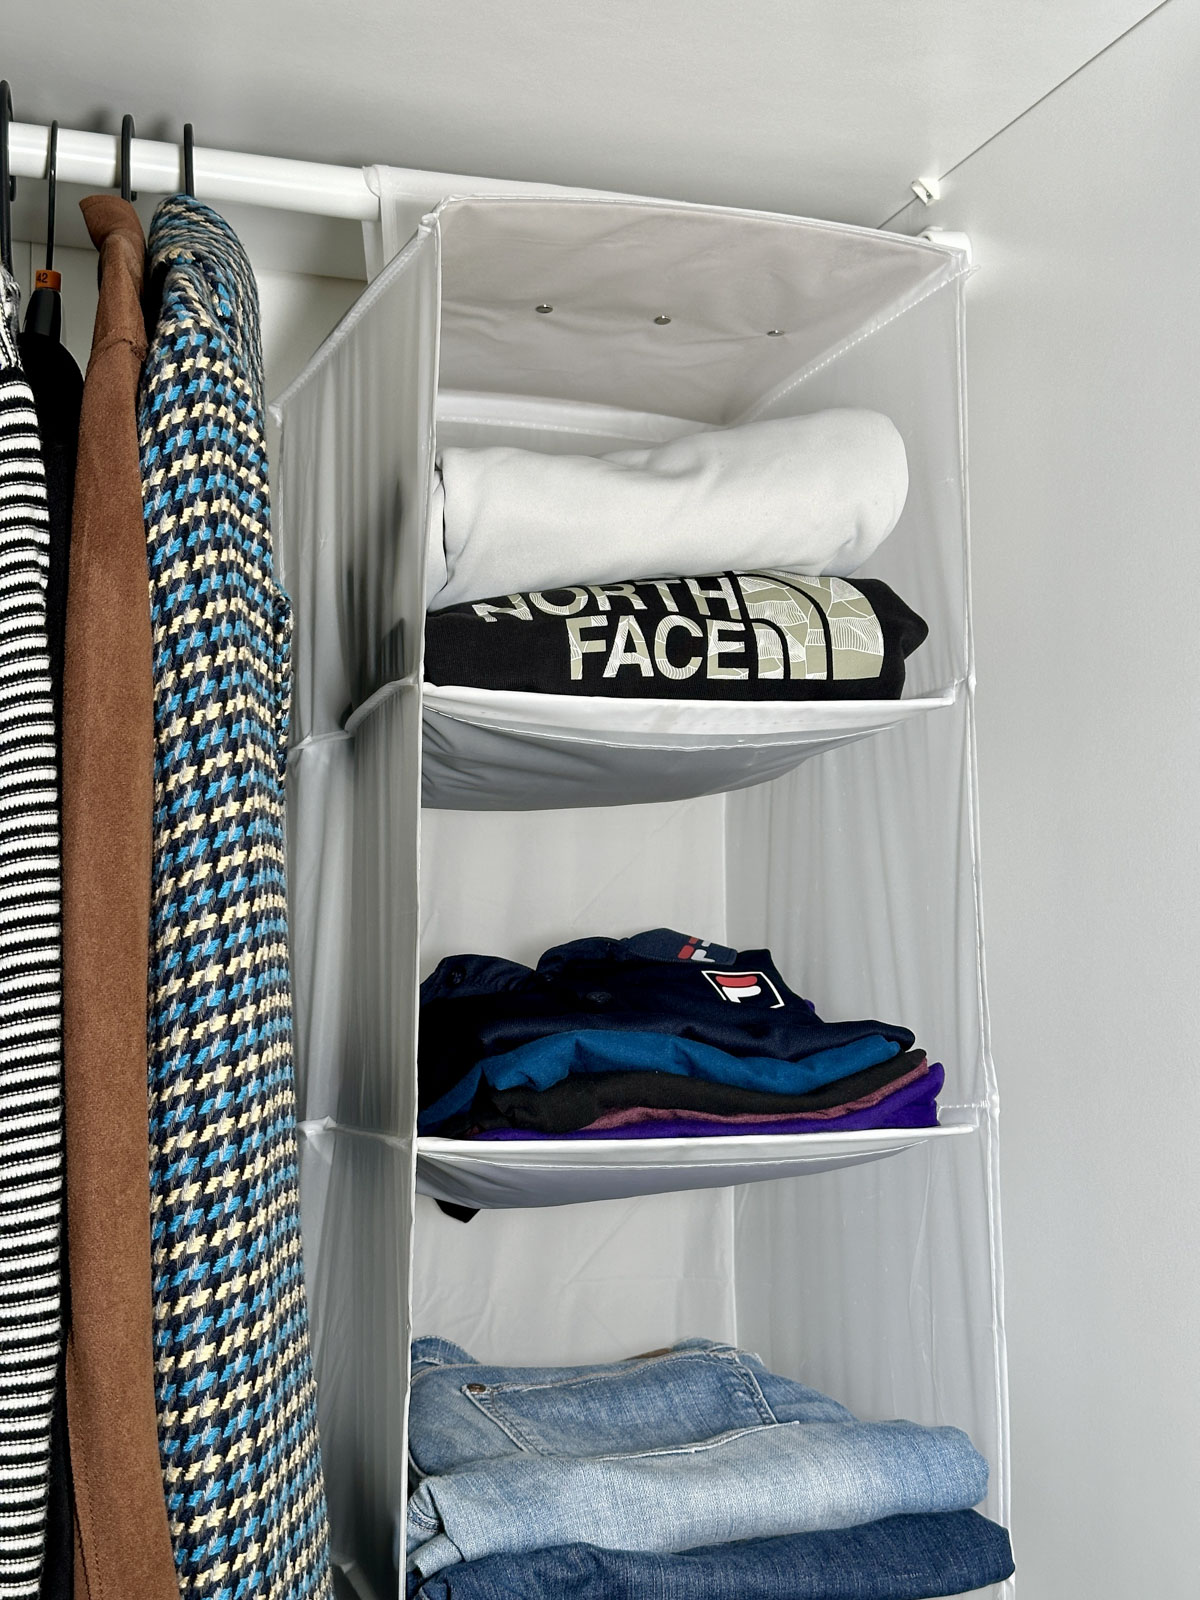 Use a Hanging Organizer to Store Clothes Vertically